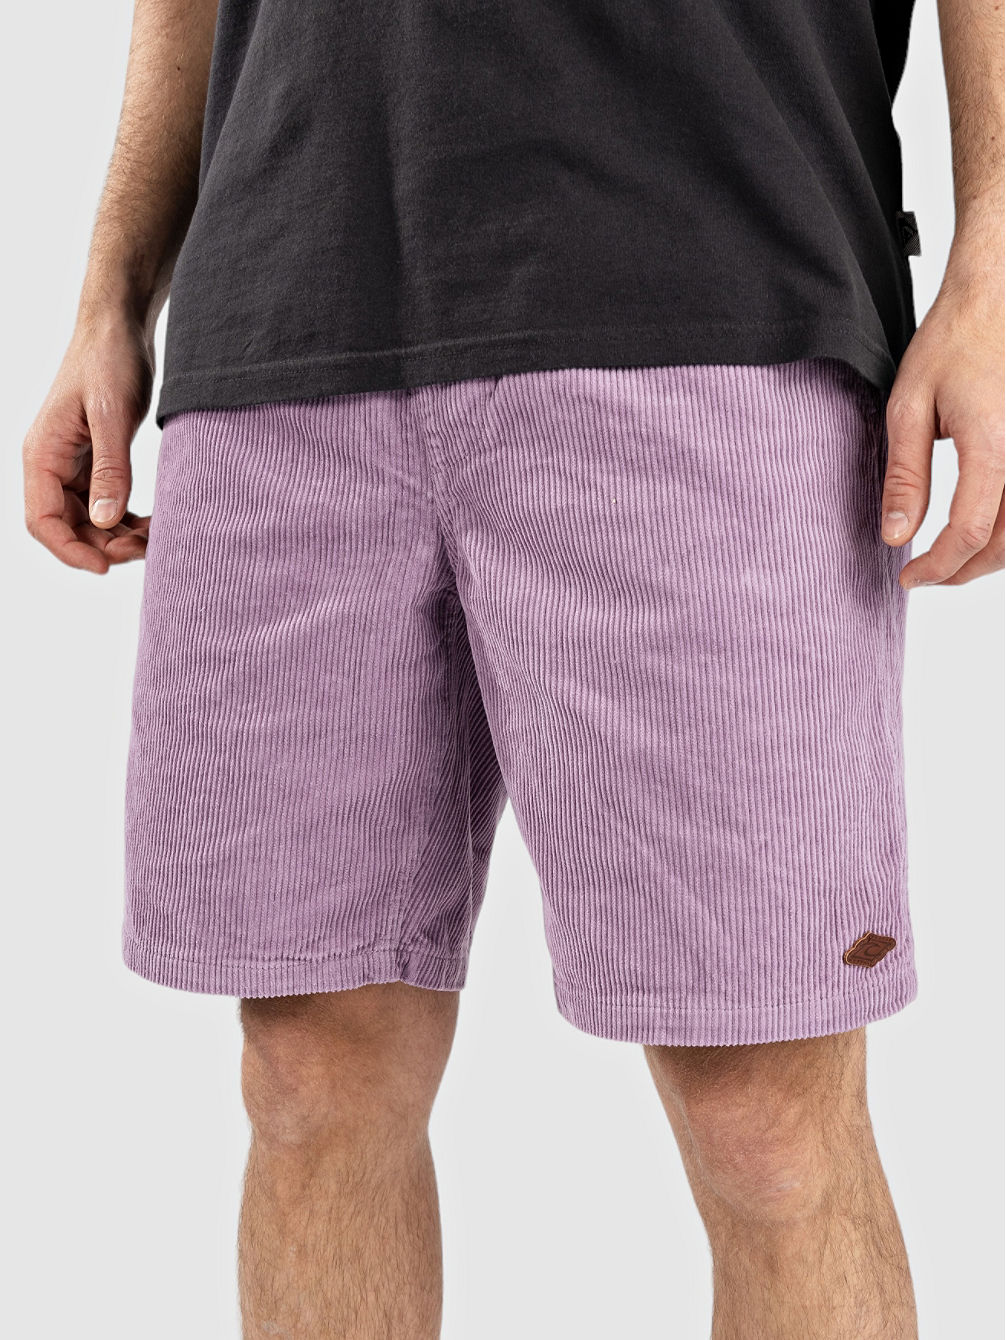 Classic Surf Cord Volley Shorts